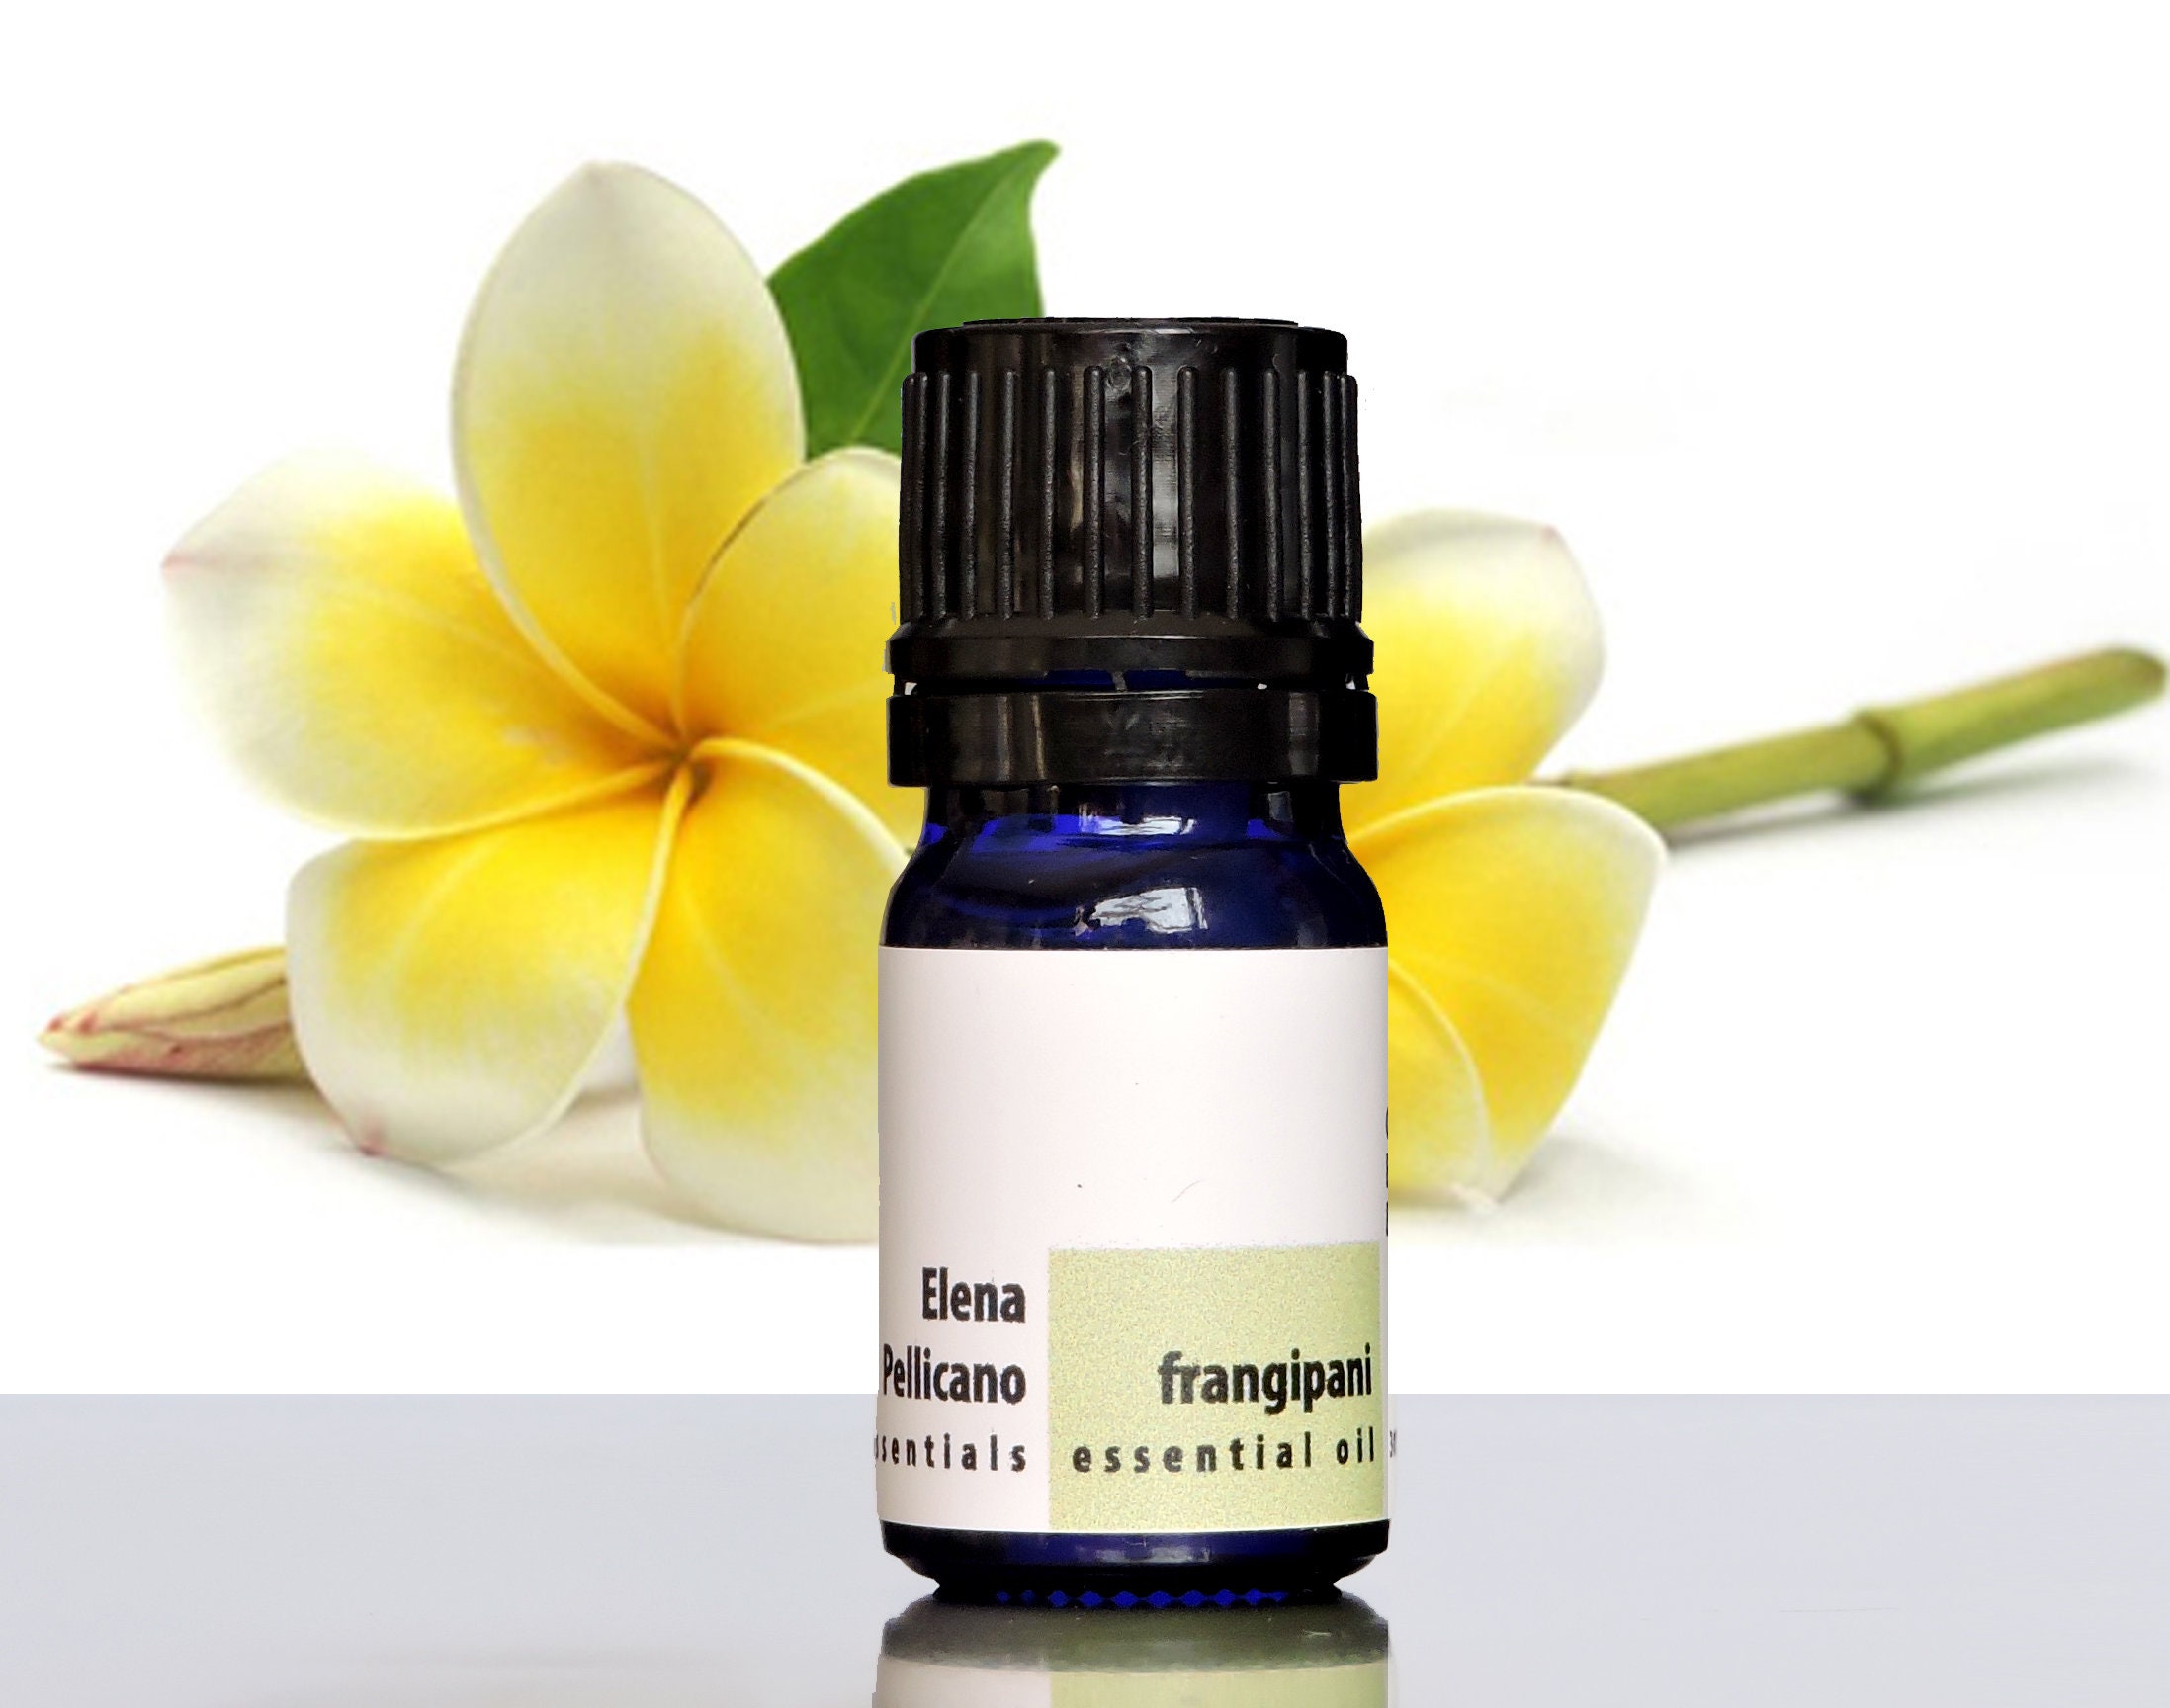 Egyptian Frangipani Essential Oil (Plumeria) - A Natural Perfume to Awaken  Joy. A Confident Floral Scent Used Alone or Mixed as a Top Note. - Nur  Creative Studio